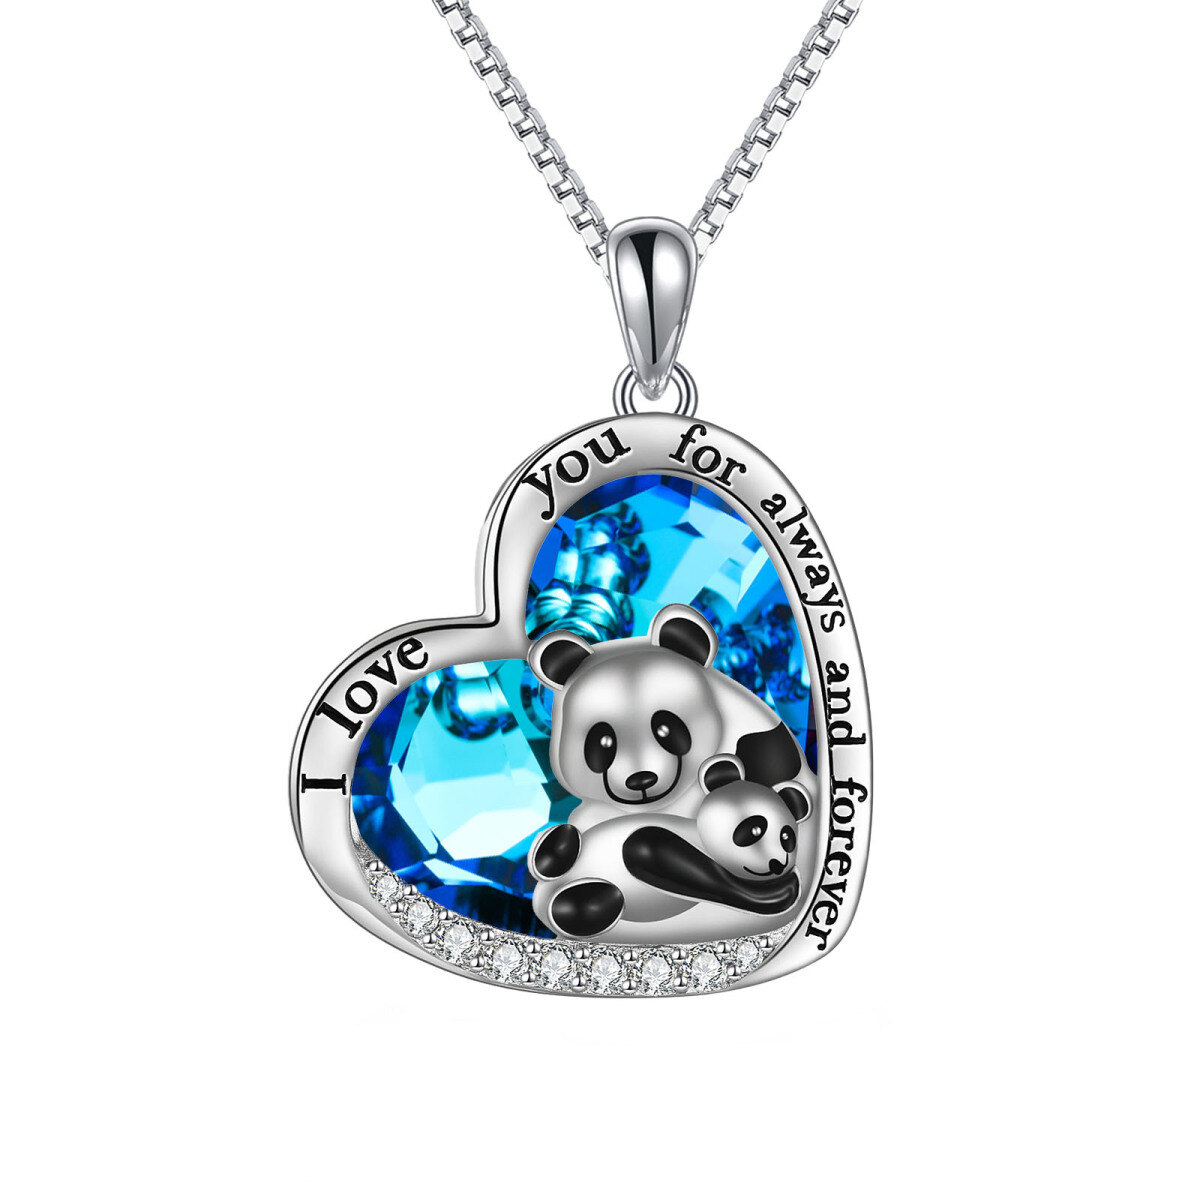 Sterling Silver Heart Shaped Panda & Heart Crystal Pendant Necklace with Engraved Word-1